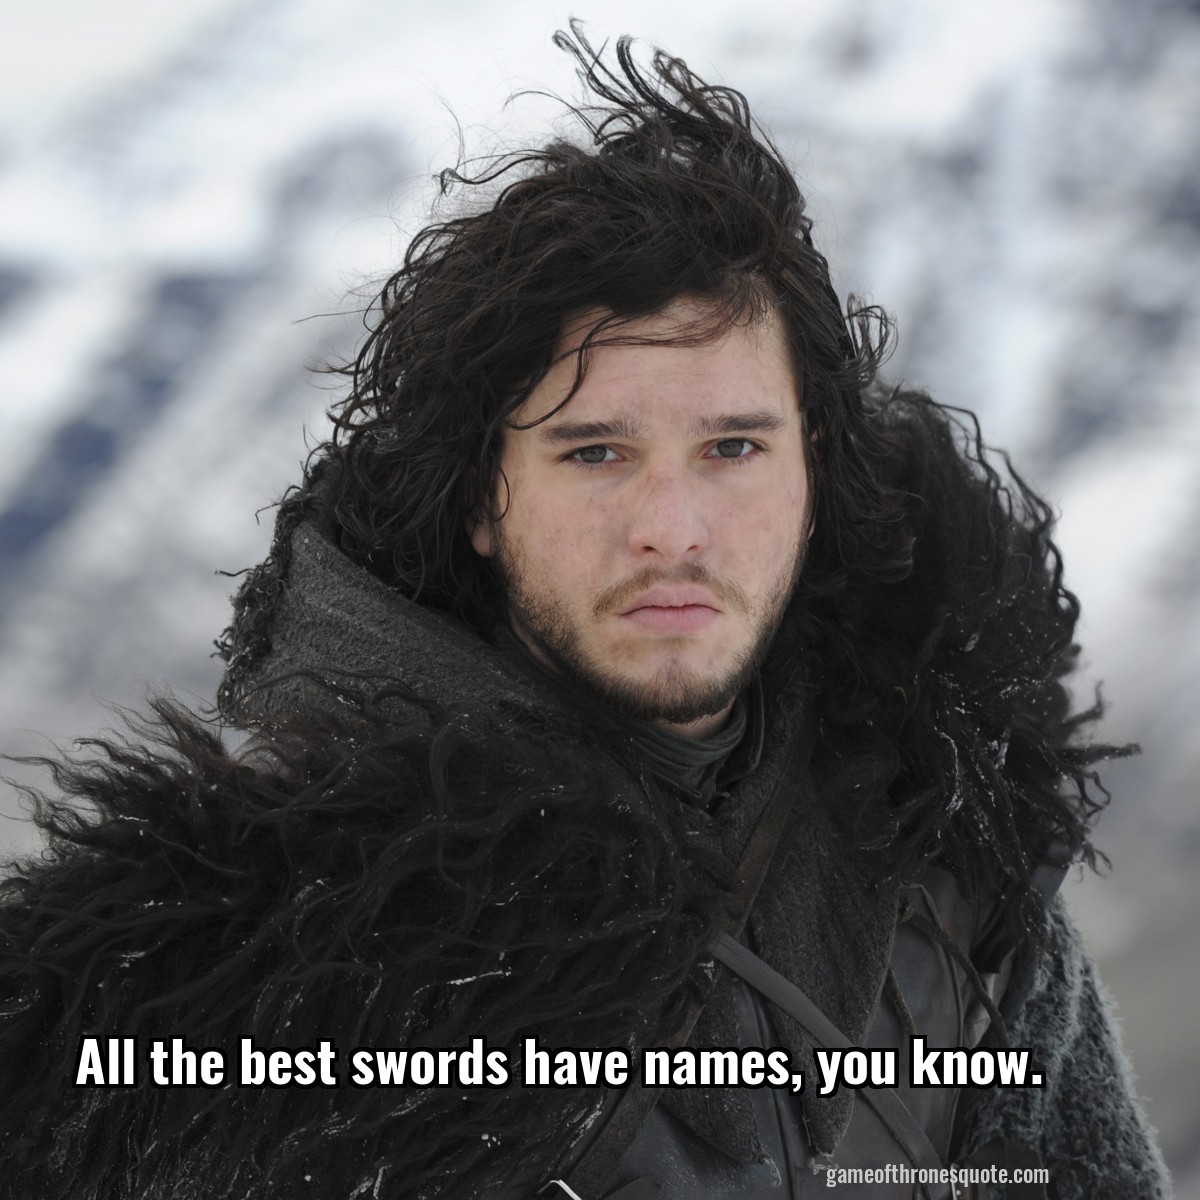 All the best swords have names, you know.